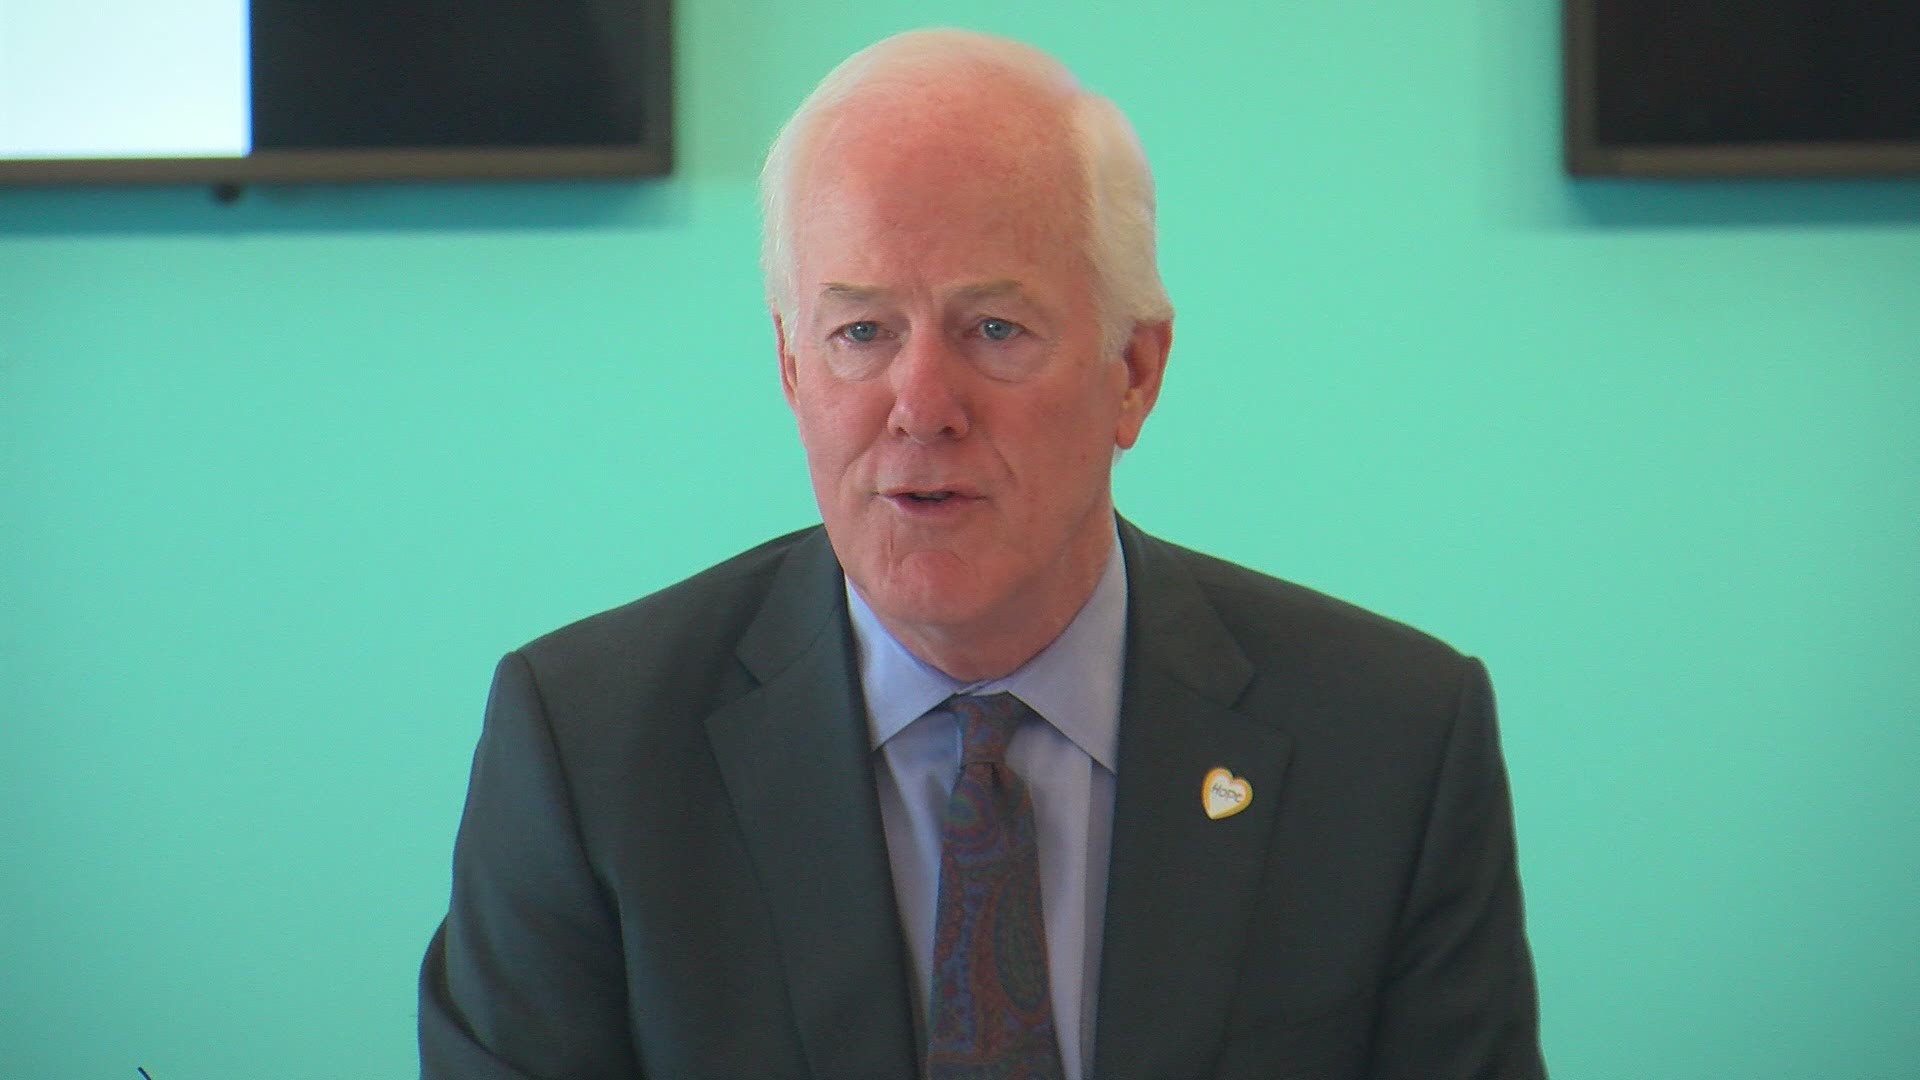 Senator John Cornyn hosted a roundtable on Wednesday at Facebook's Austin office to discuss the "CyberTipline Modernization Act."